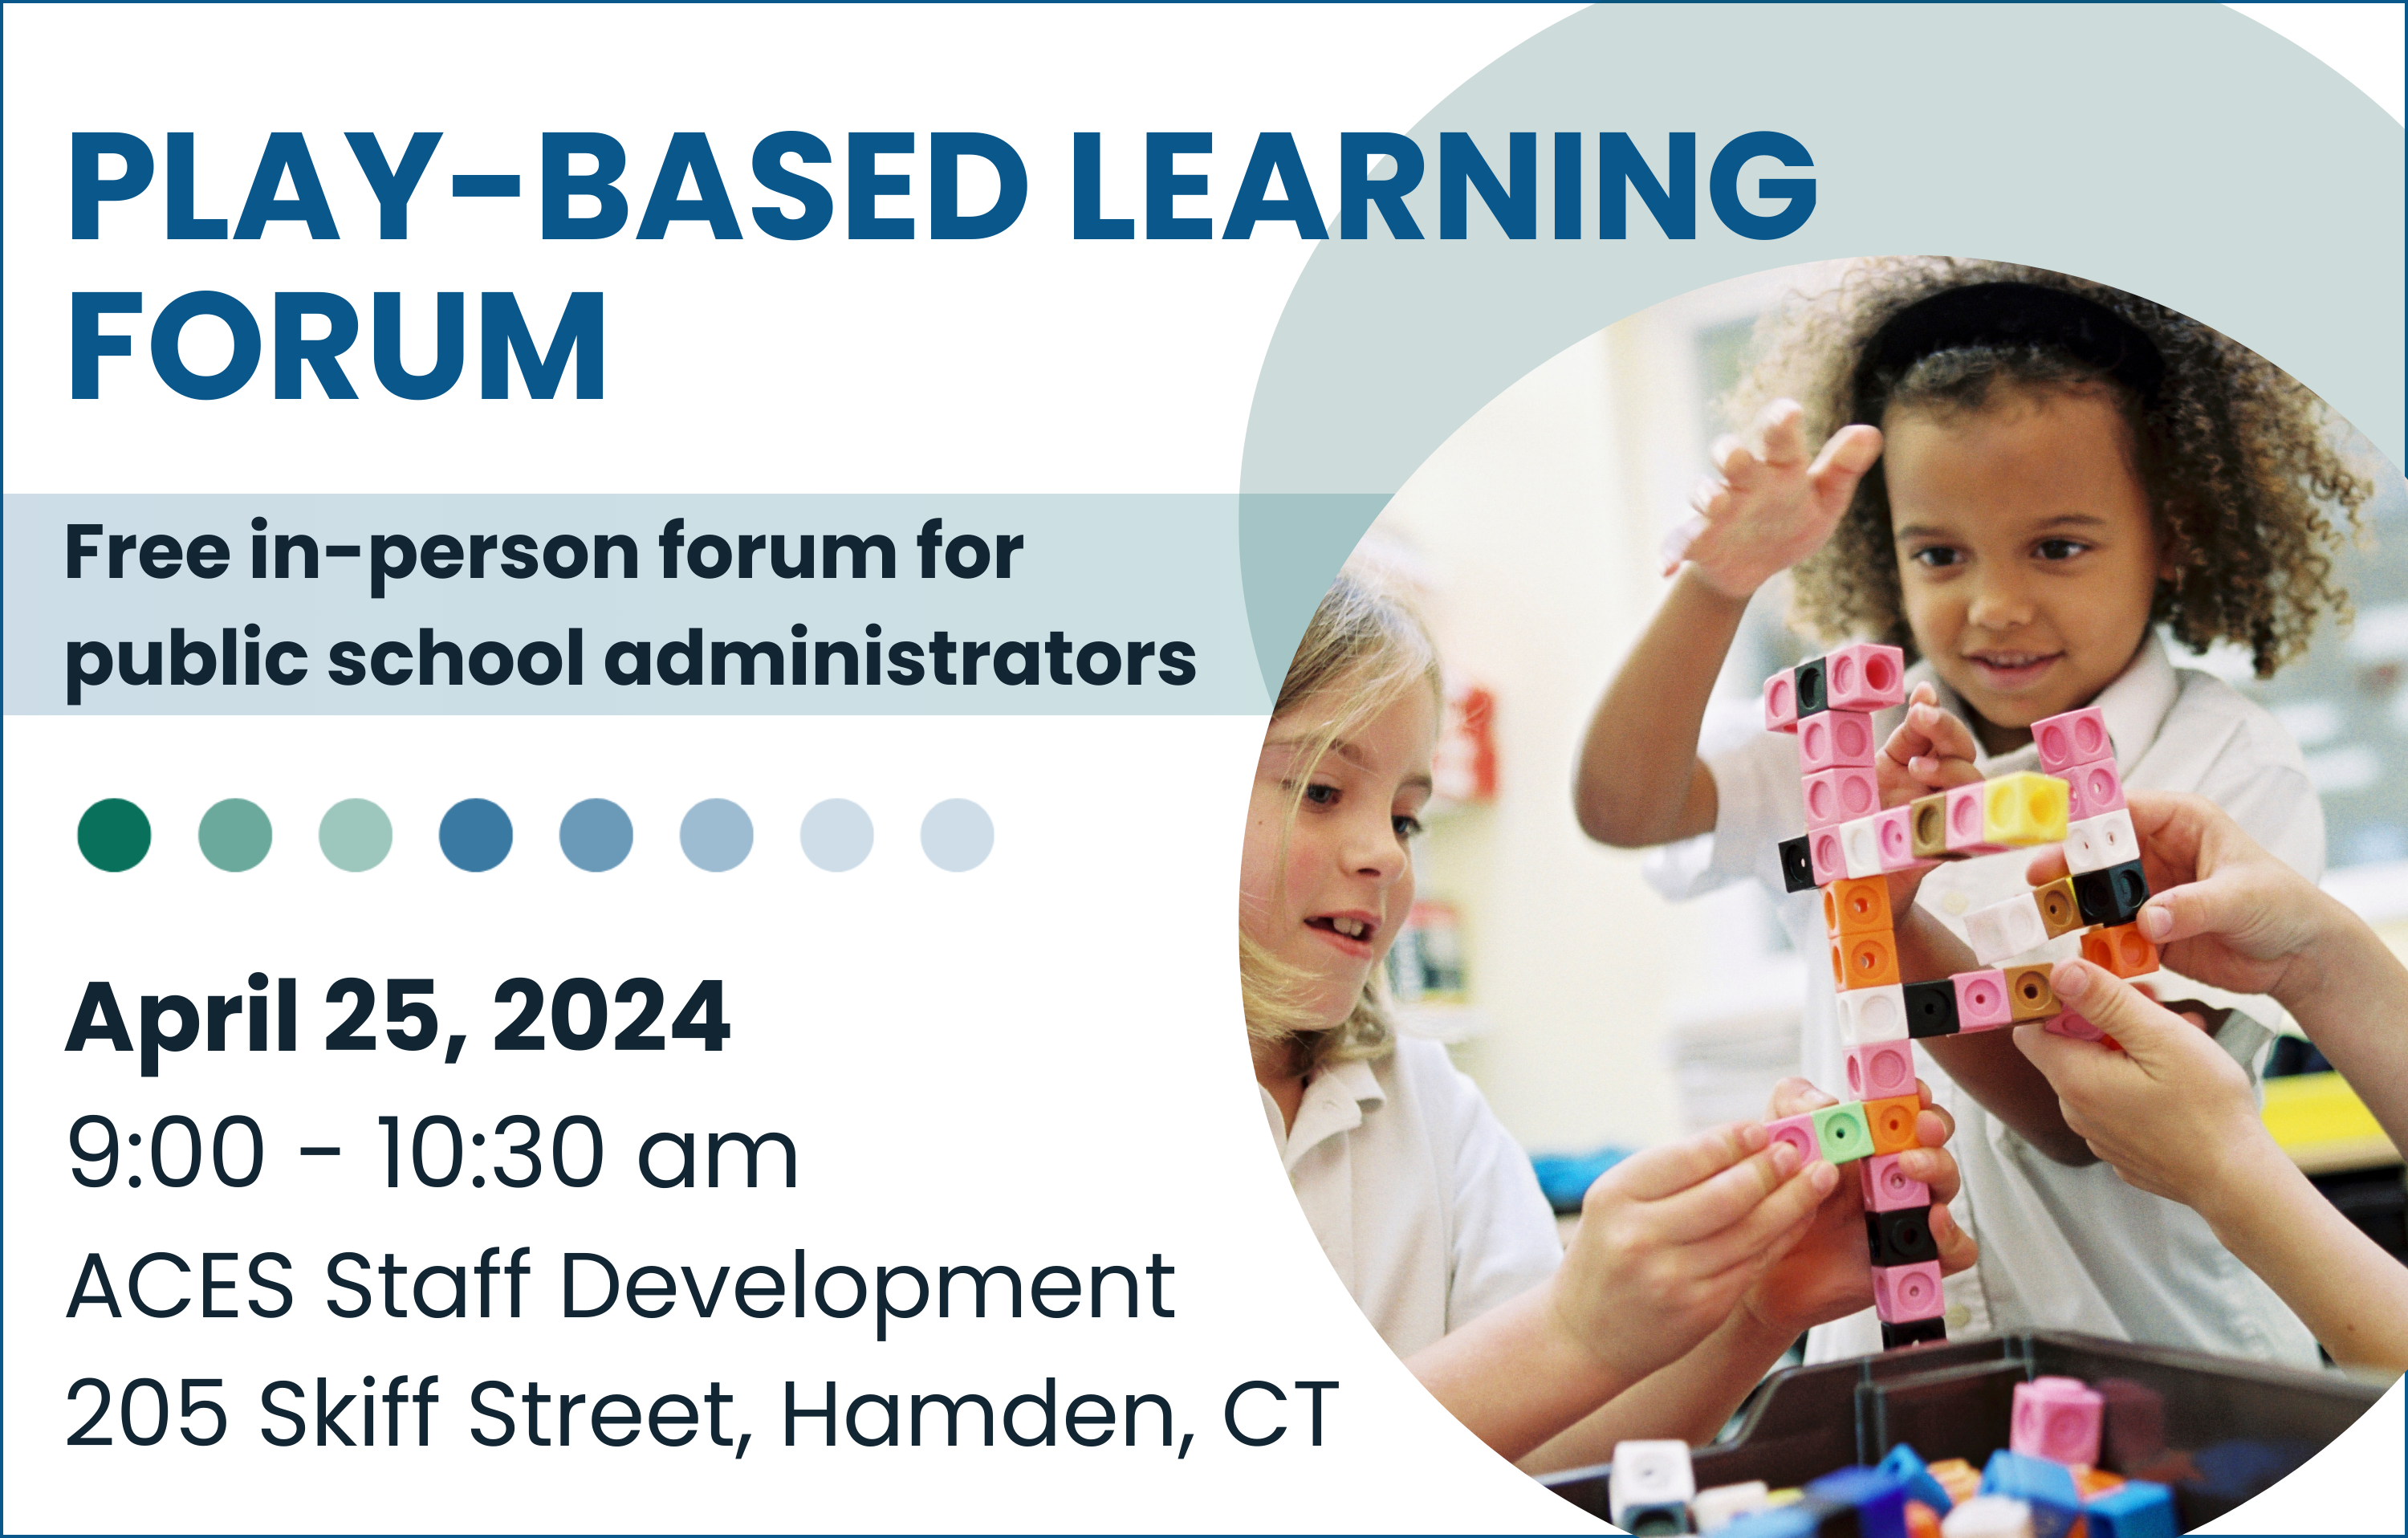 Register for the Play-Based Learning Forum